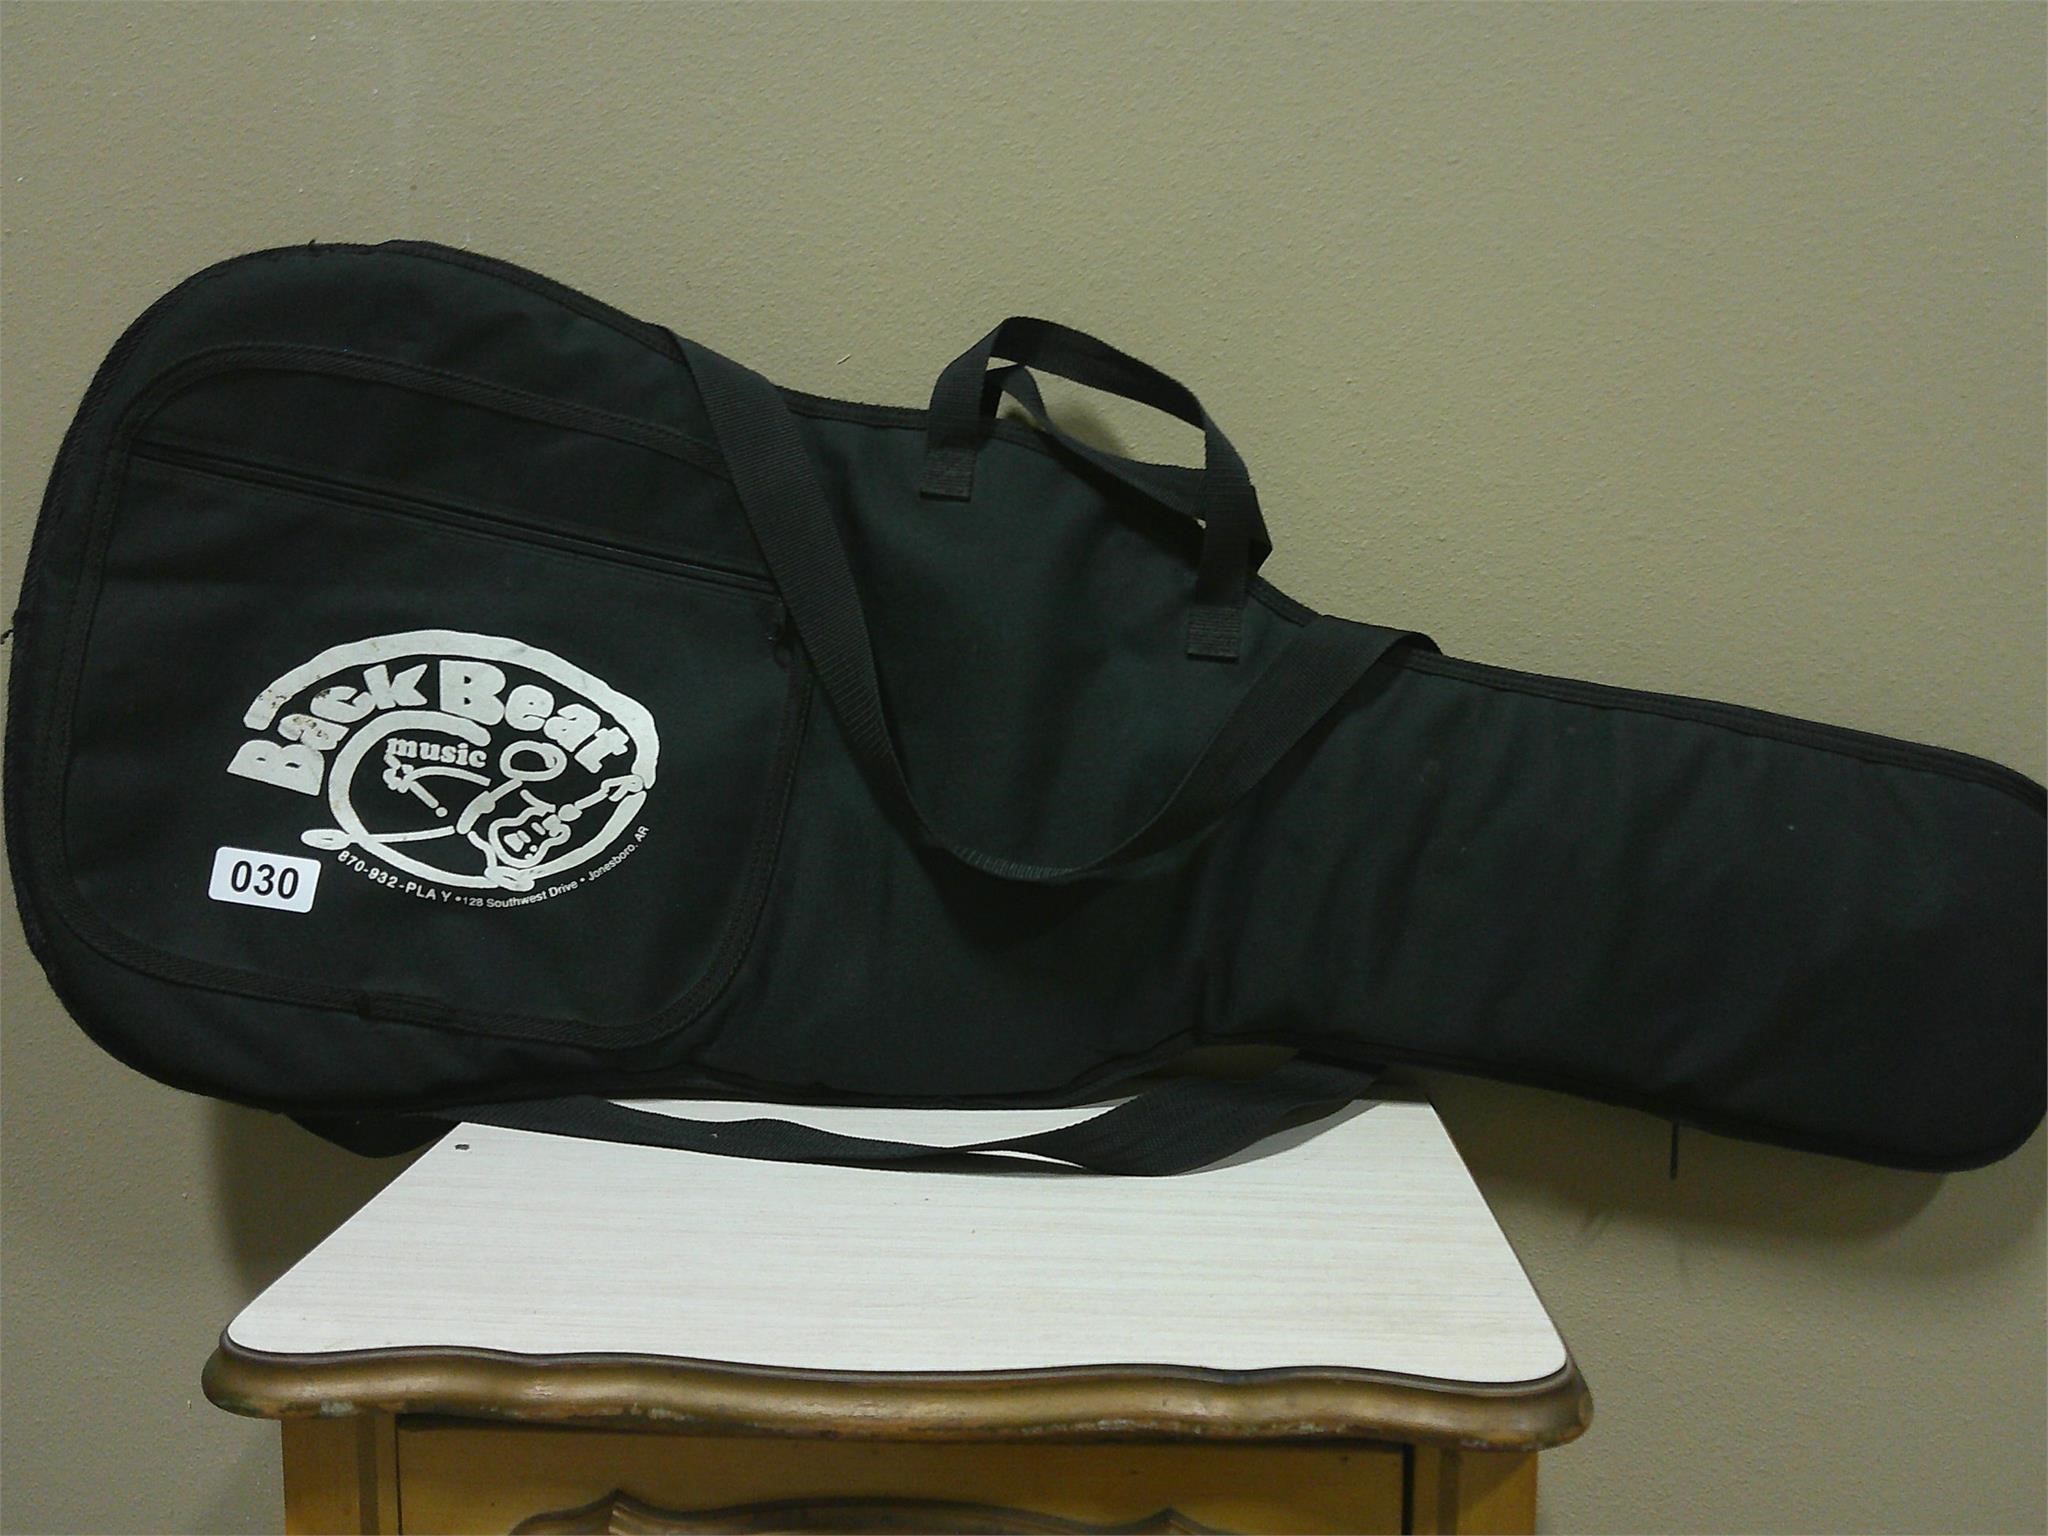 Guitar backpack soft case with logo from